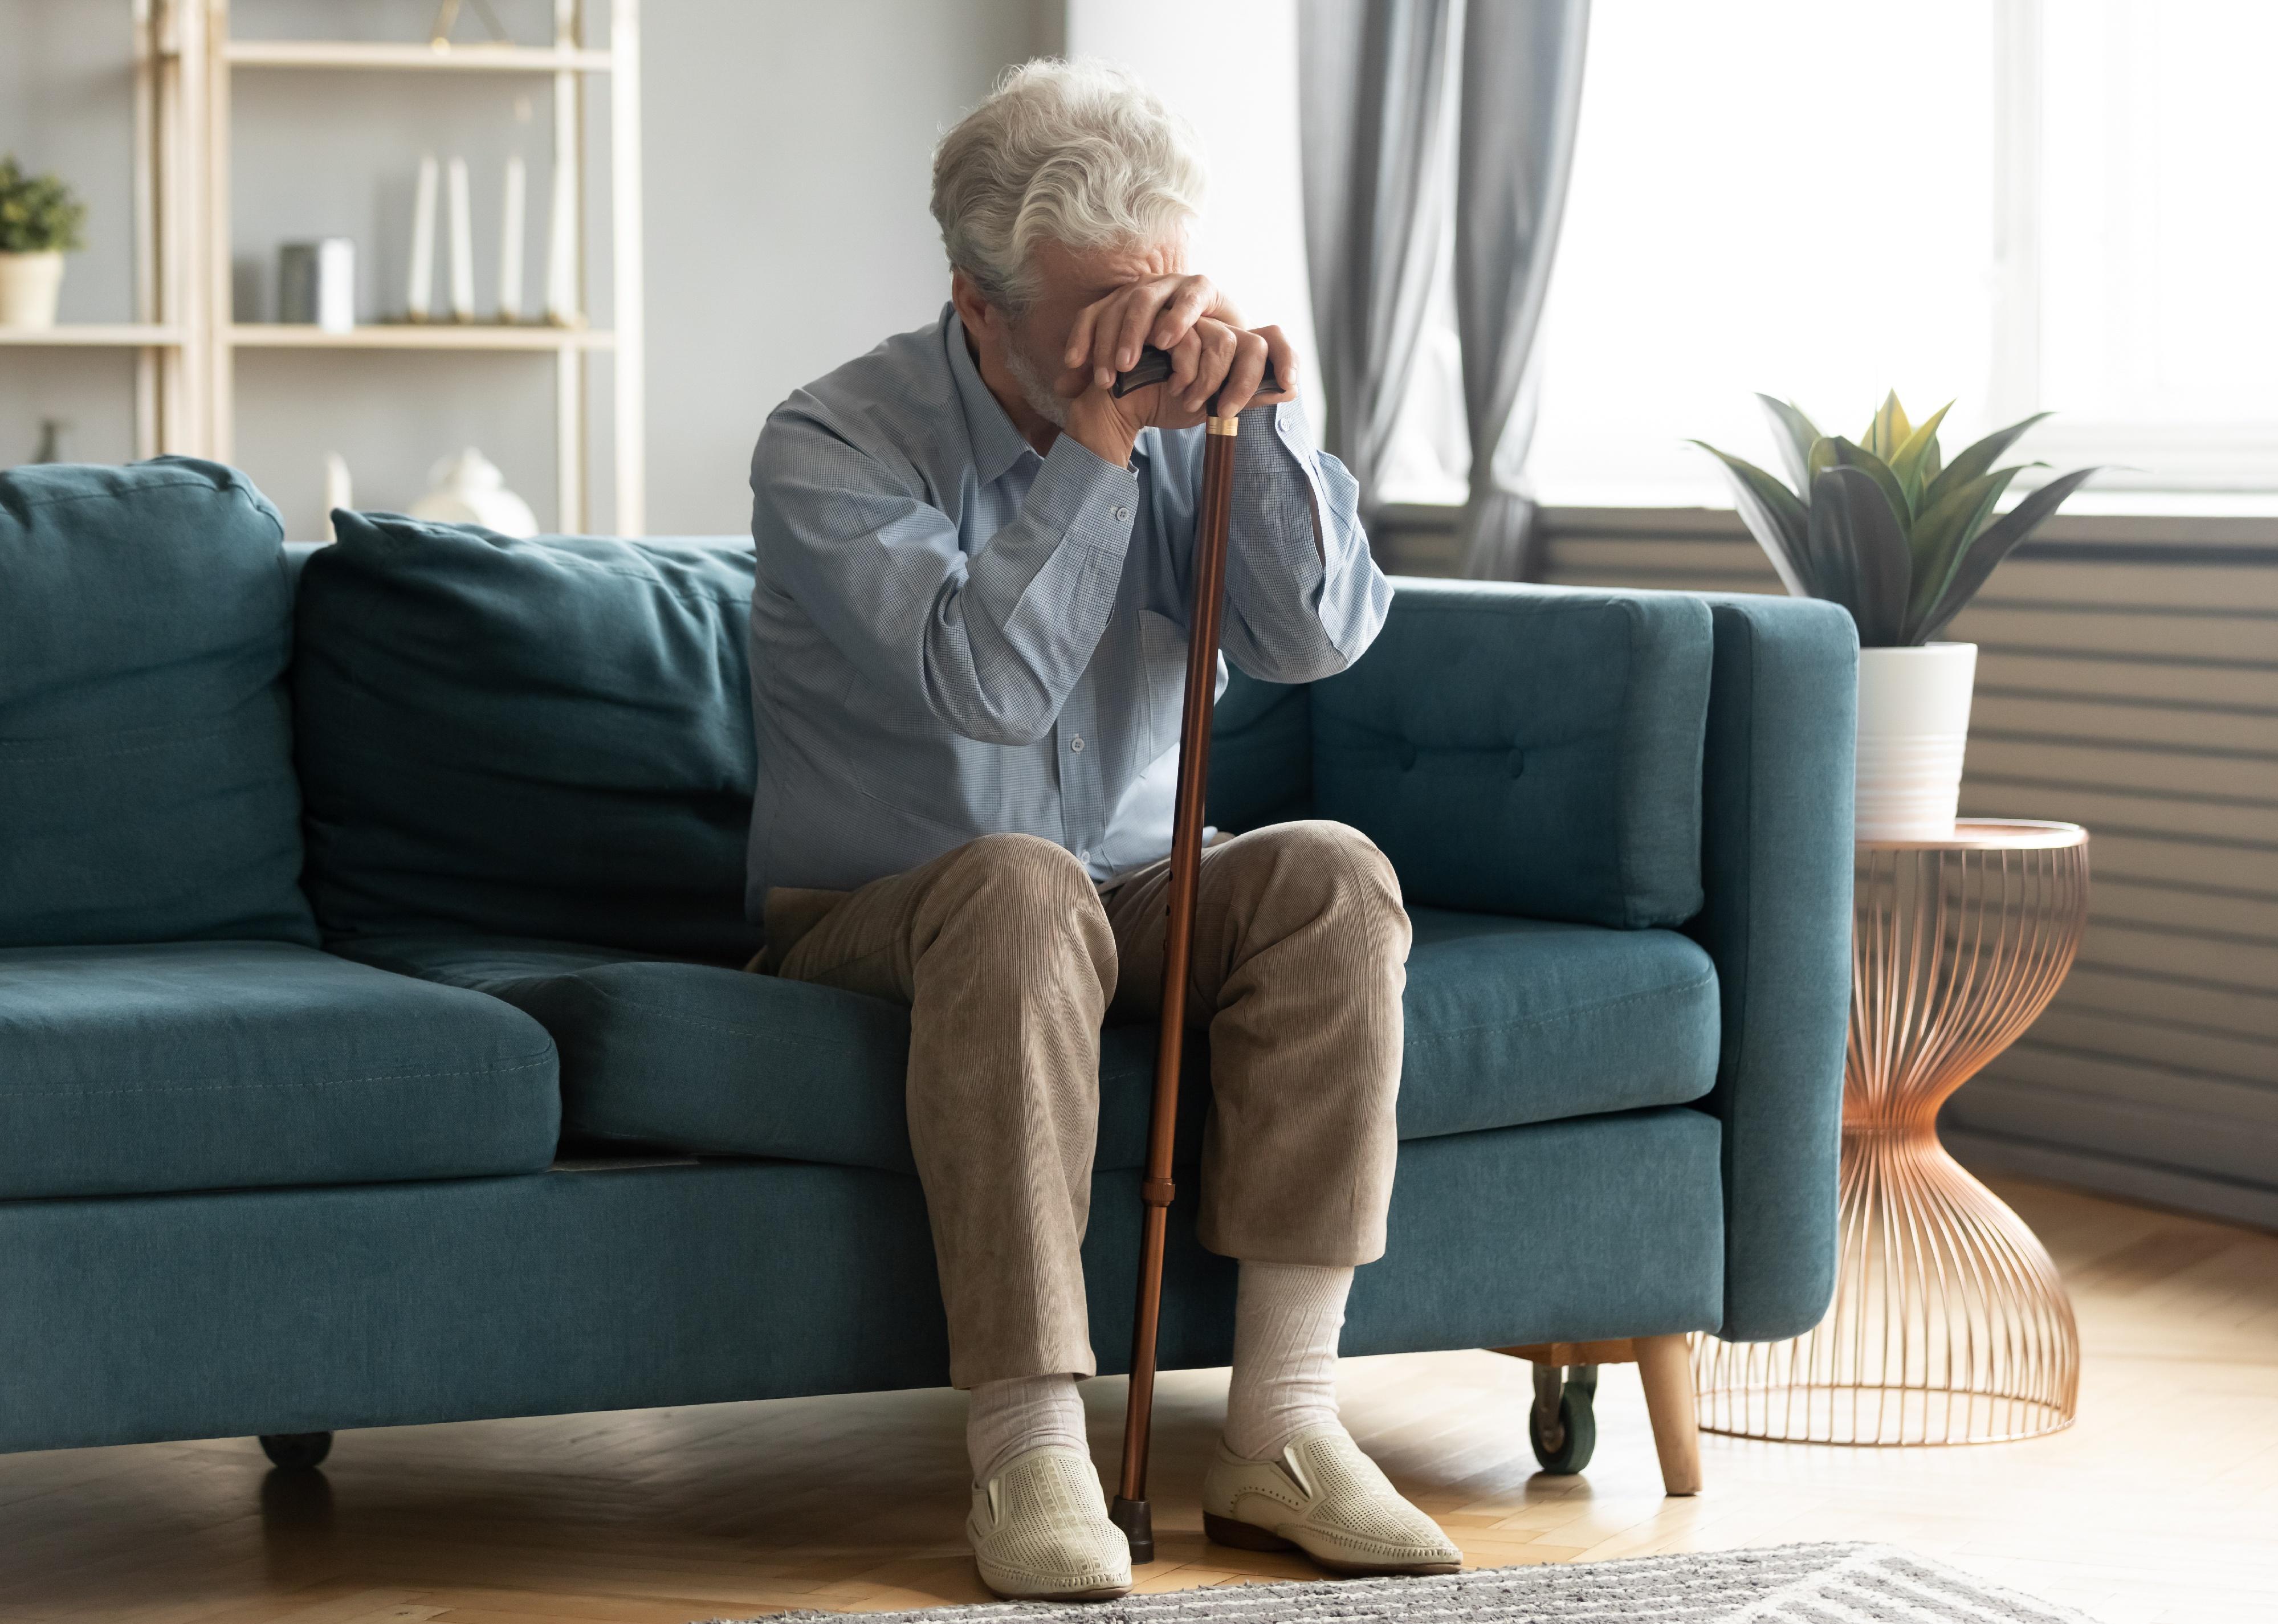 <p>Seniors may show signs of being <a href="https://www.healthline.com/health/agitated-depression">agitated, busy, or short-tempered</a> by manifesting consistent nervous behaviors. They can repeatedly tap their fingers against a table, fidget, or repeat movements. They may also fixate on specific daily tasks such as cleaning and organizing, moving objects from one place to another, or making up excuses to try to leave the house. These and other demonstrations of restlessness, while a common symptom in Alzheimer's patients, can also be a sign of depression, especially when combined with episodes of irritability.</p>